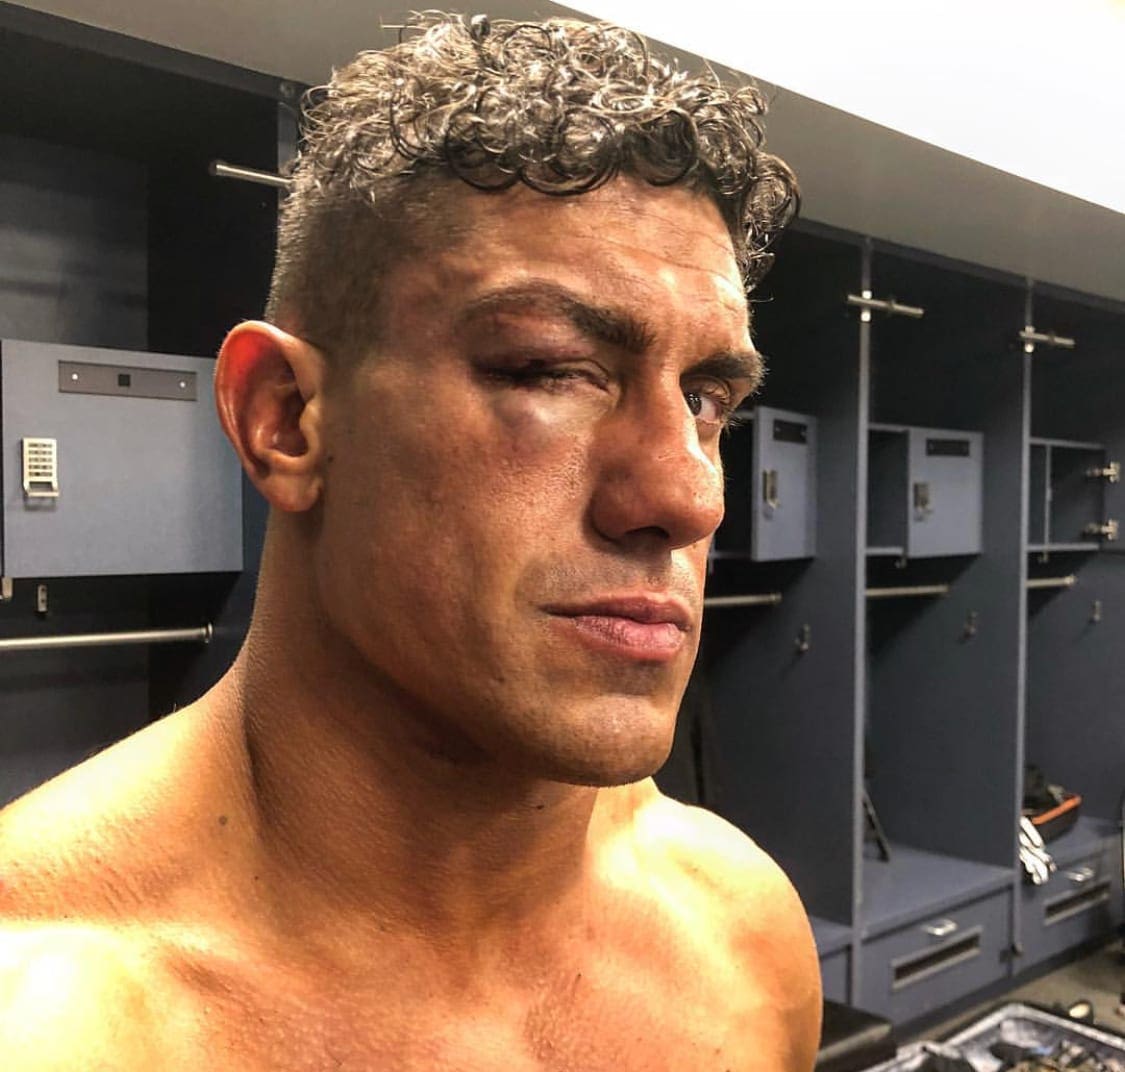 EC3 Still Not Cleared To Wrestle After TakeOver: Brooklyn IV Injury